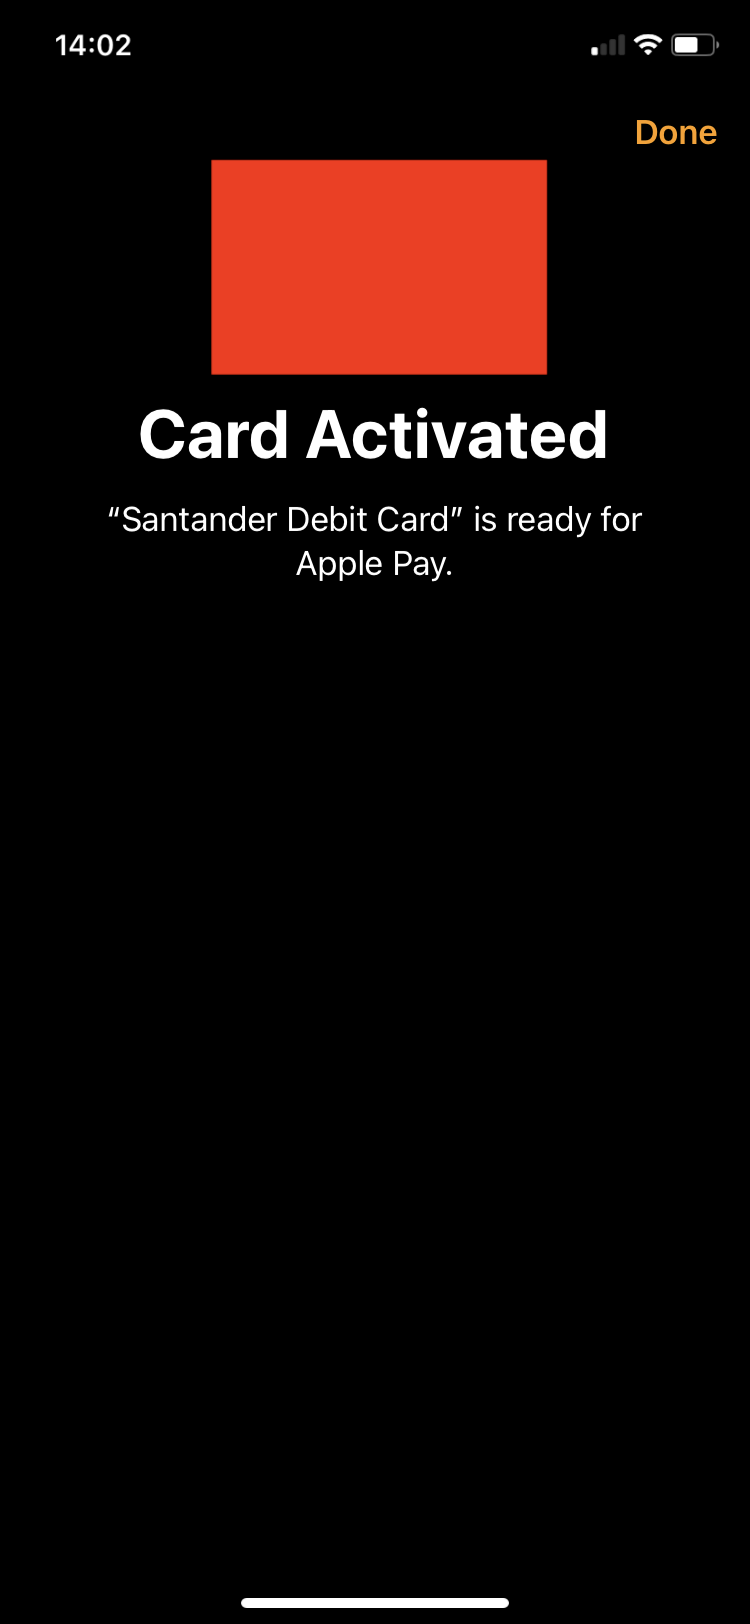 How to use Apple Pay on Apple Watch - card activated